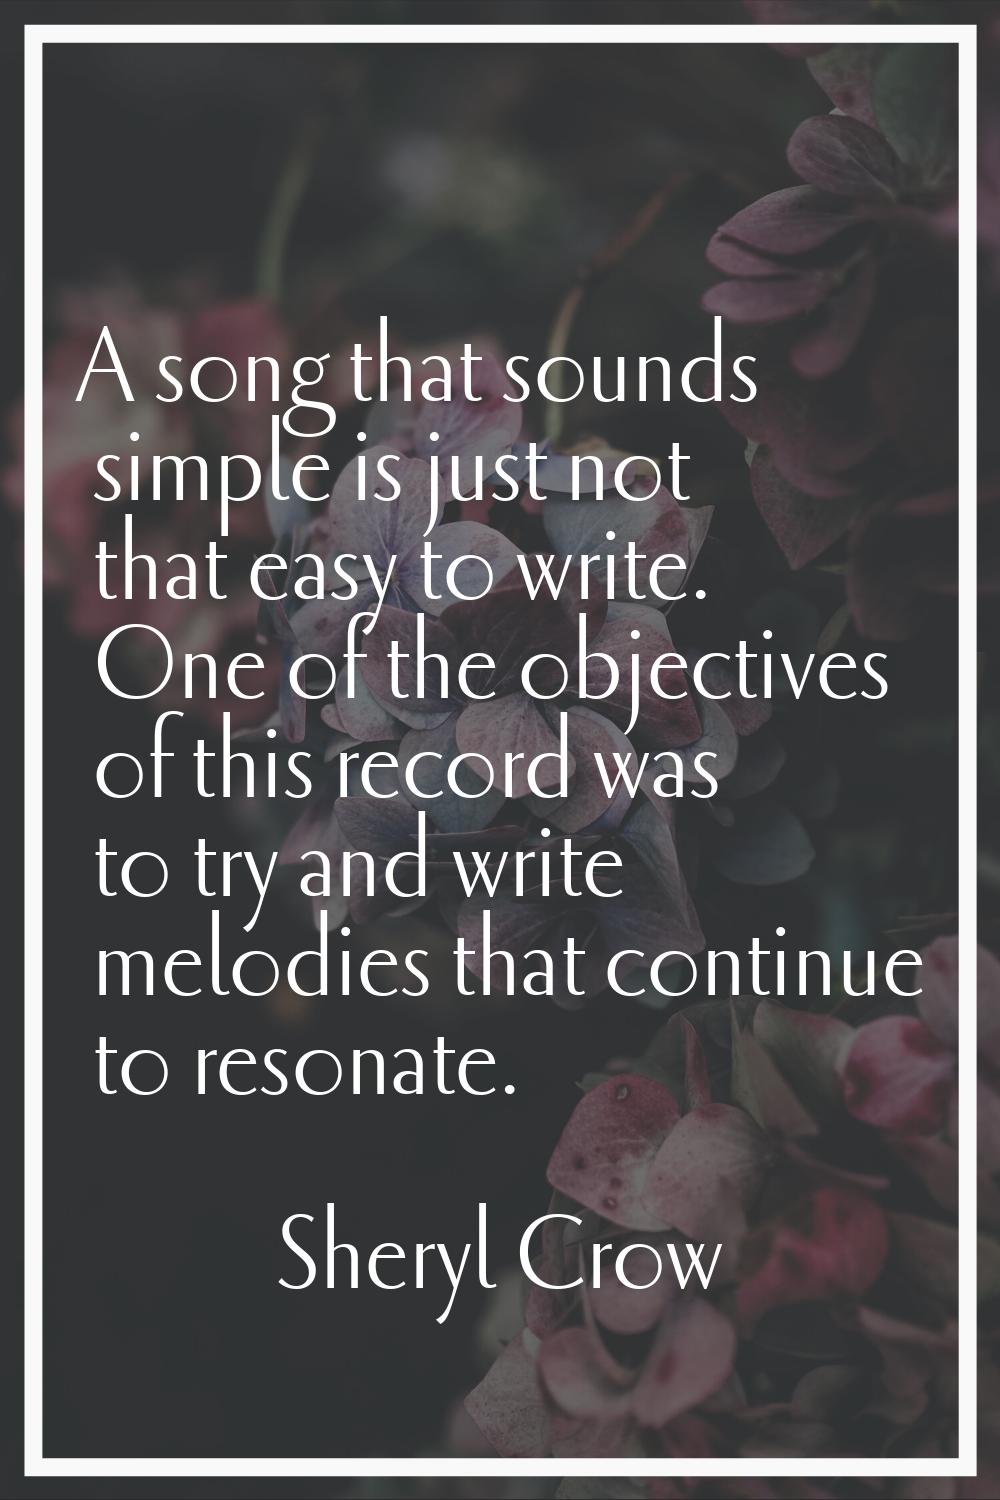 A song that sounds simple is just not that easy to write. One of the objectives of this record was 